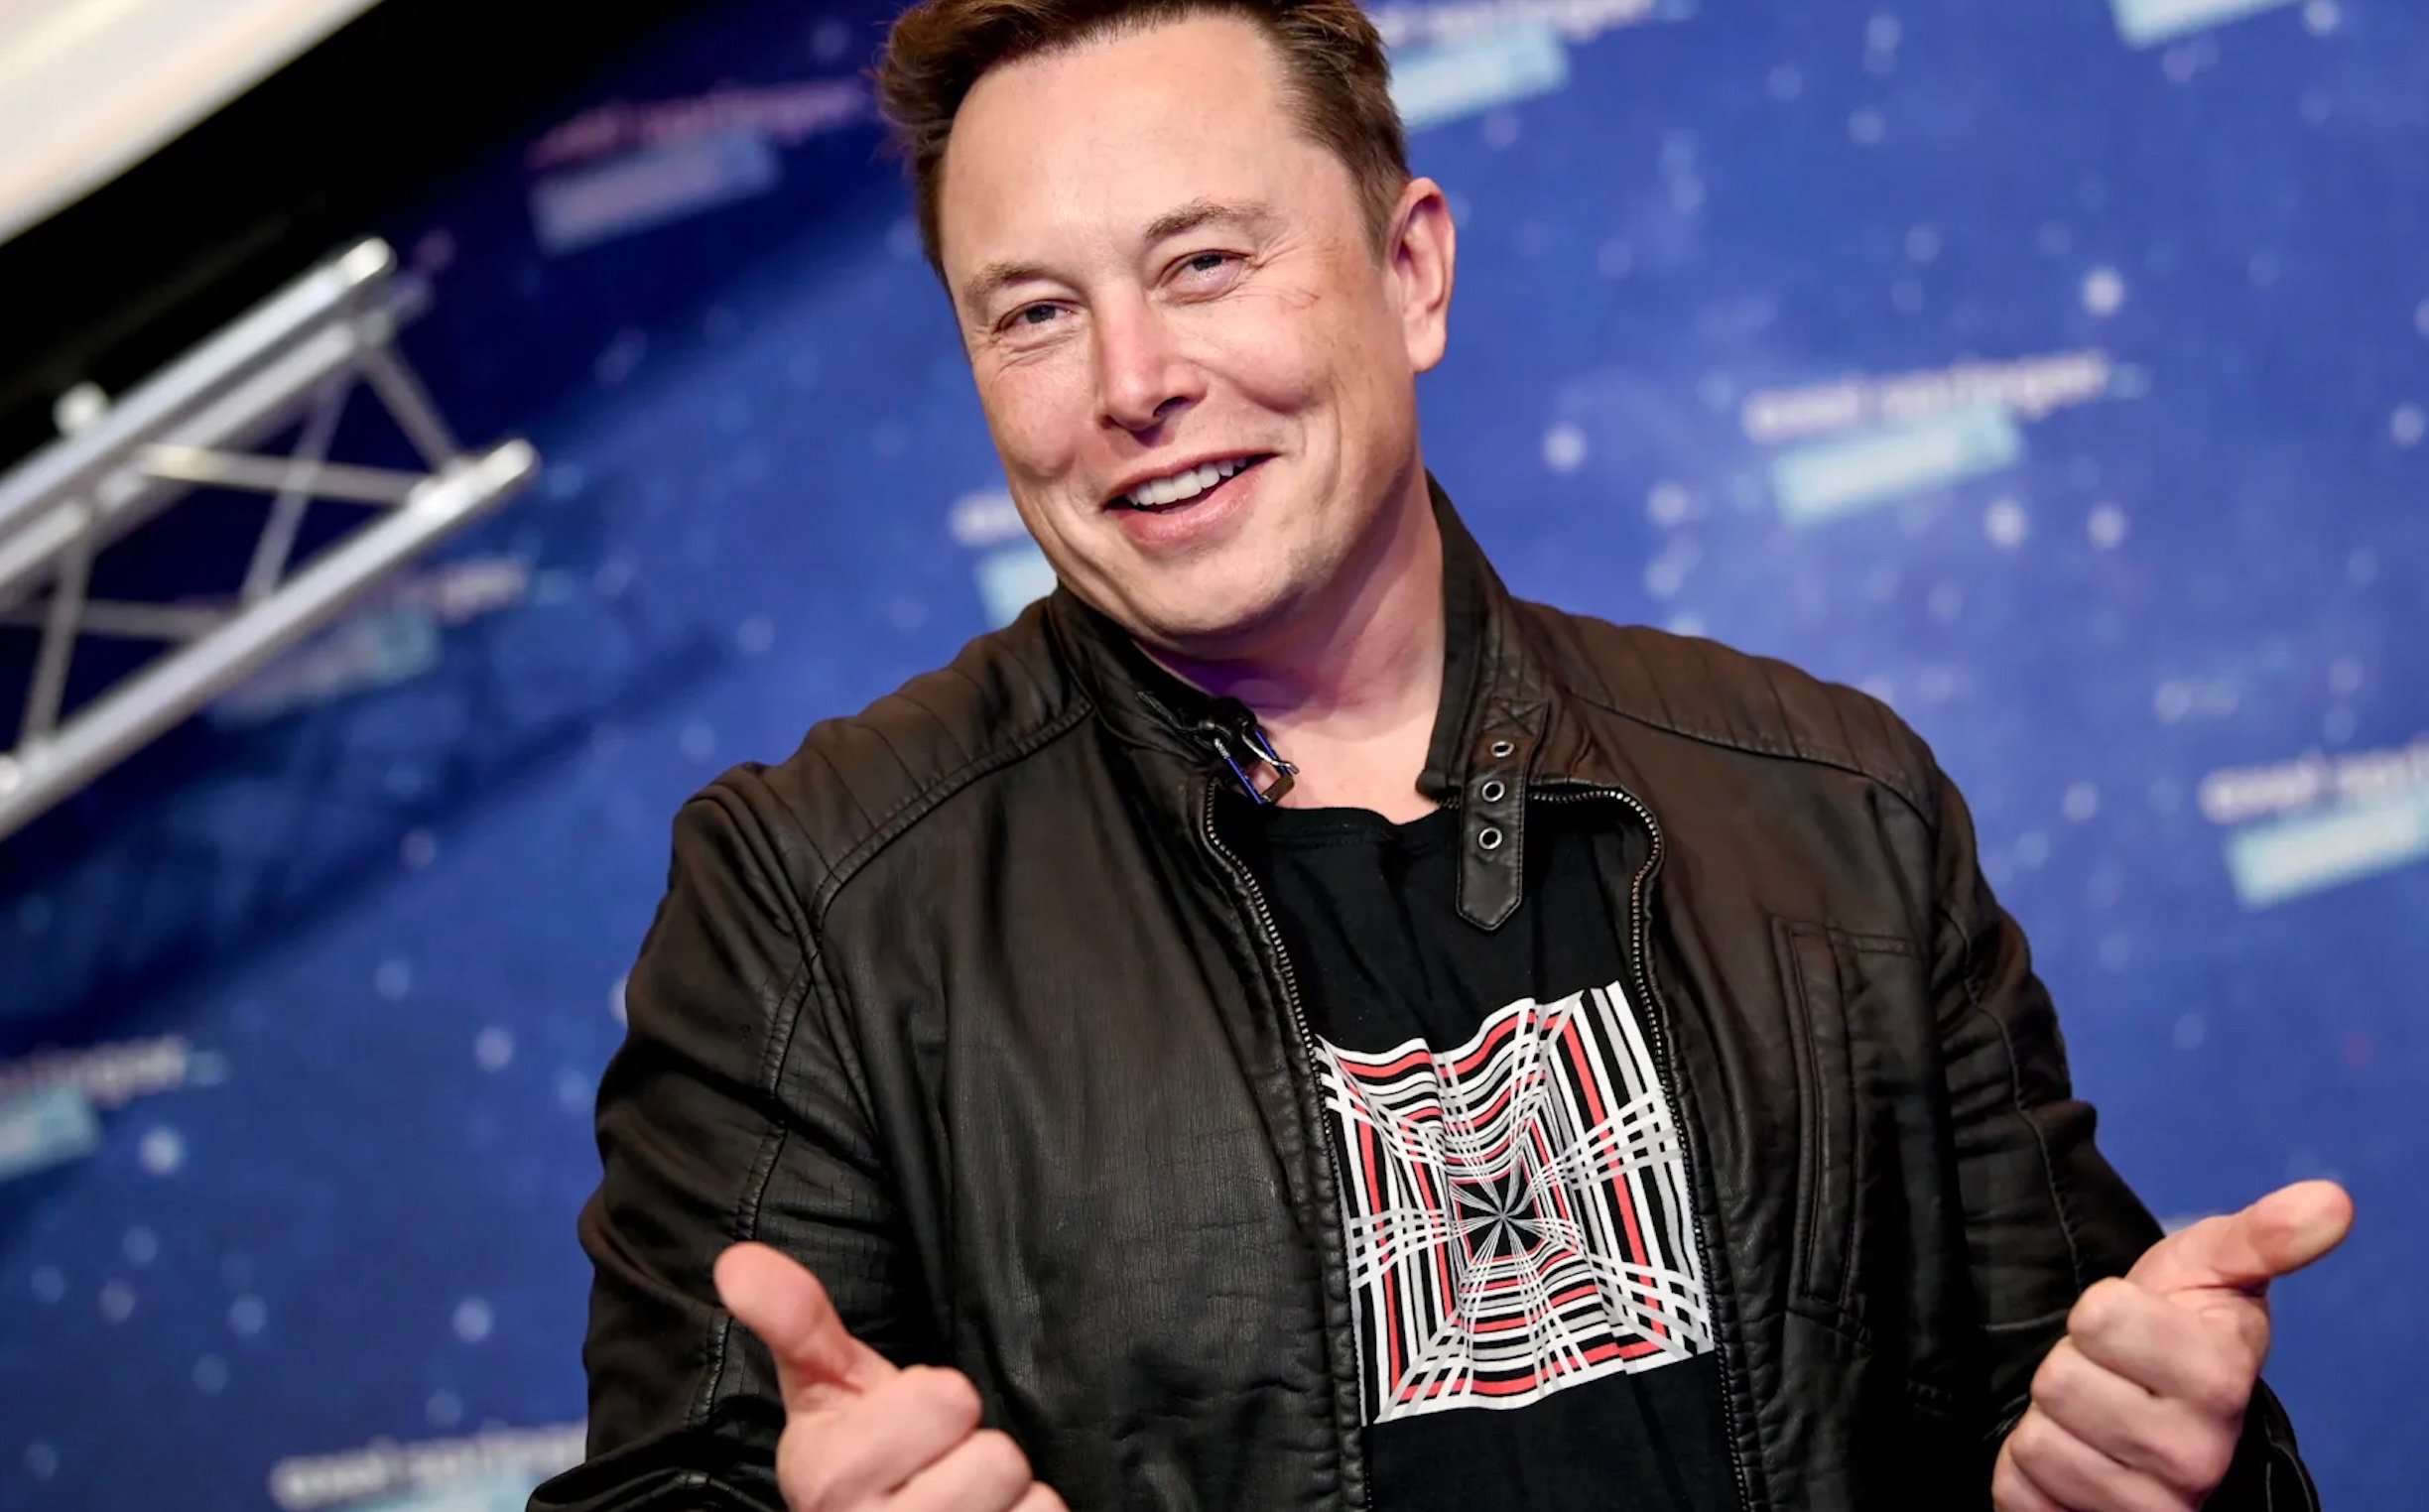 REPORT: Twitter and Elon Musk In Final Negotiations on Takeover Bid- Deal Could Be Reached Today